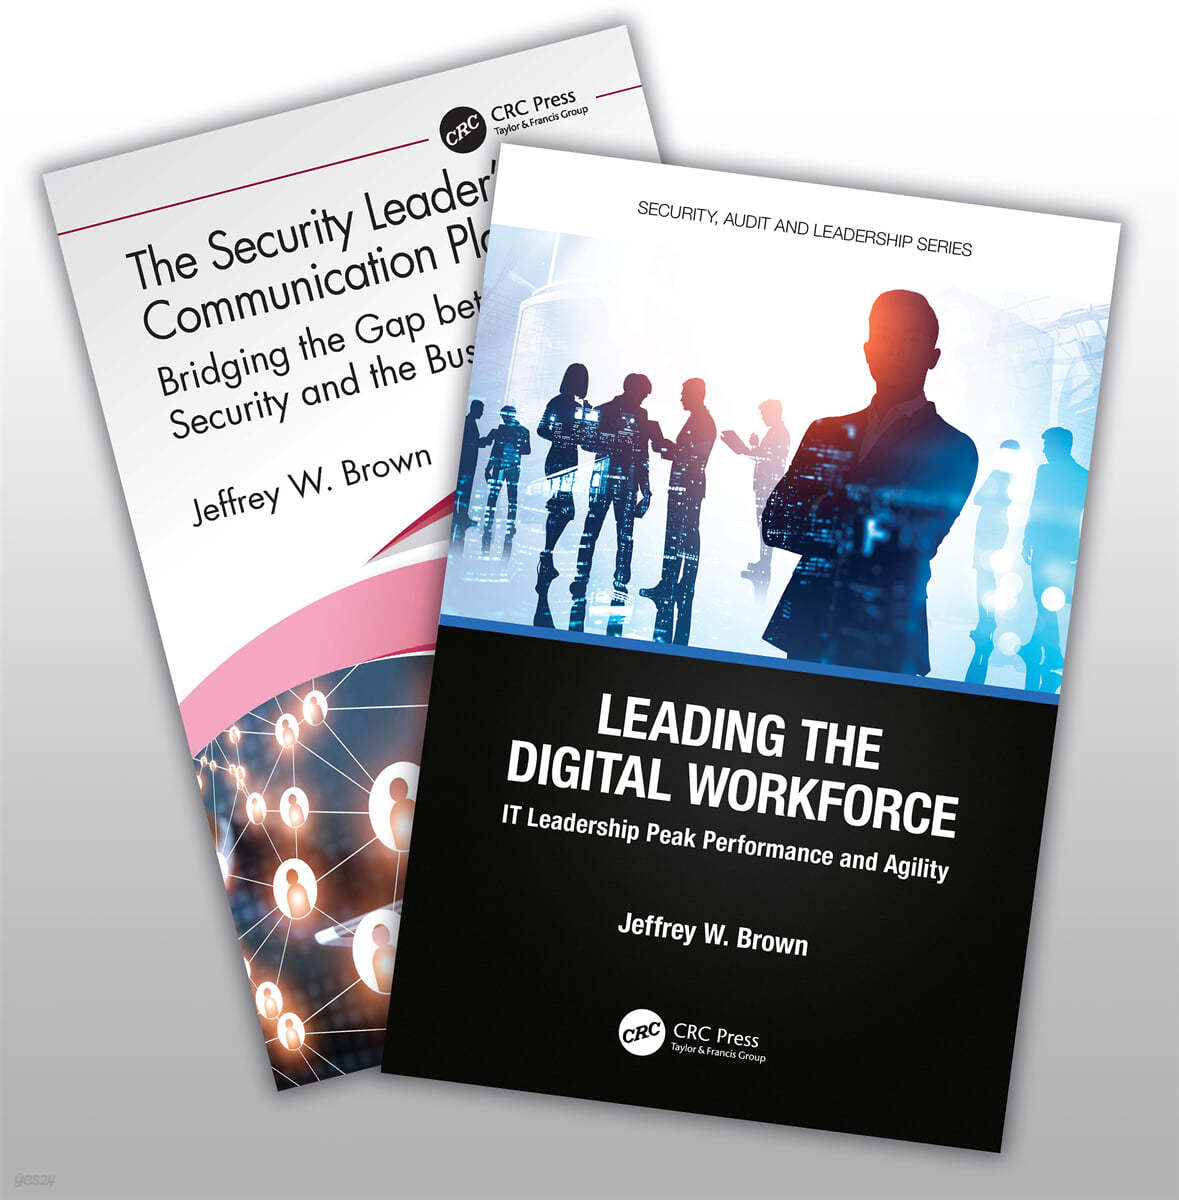 Security Leader’s Communication Playbook and Leading the Digital Workforce Set